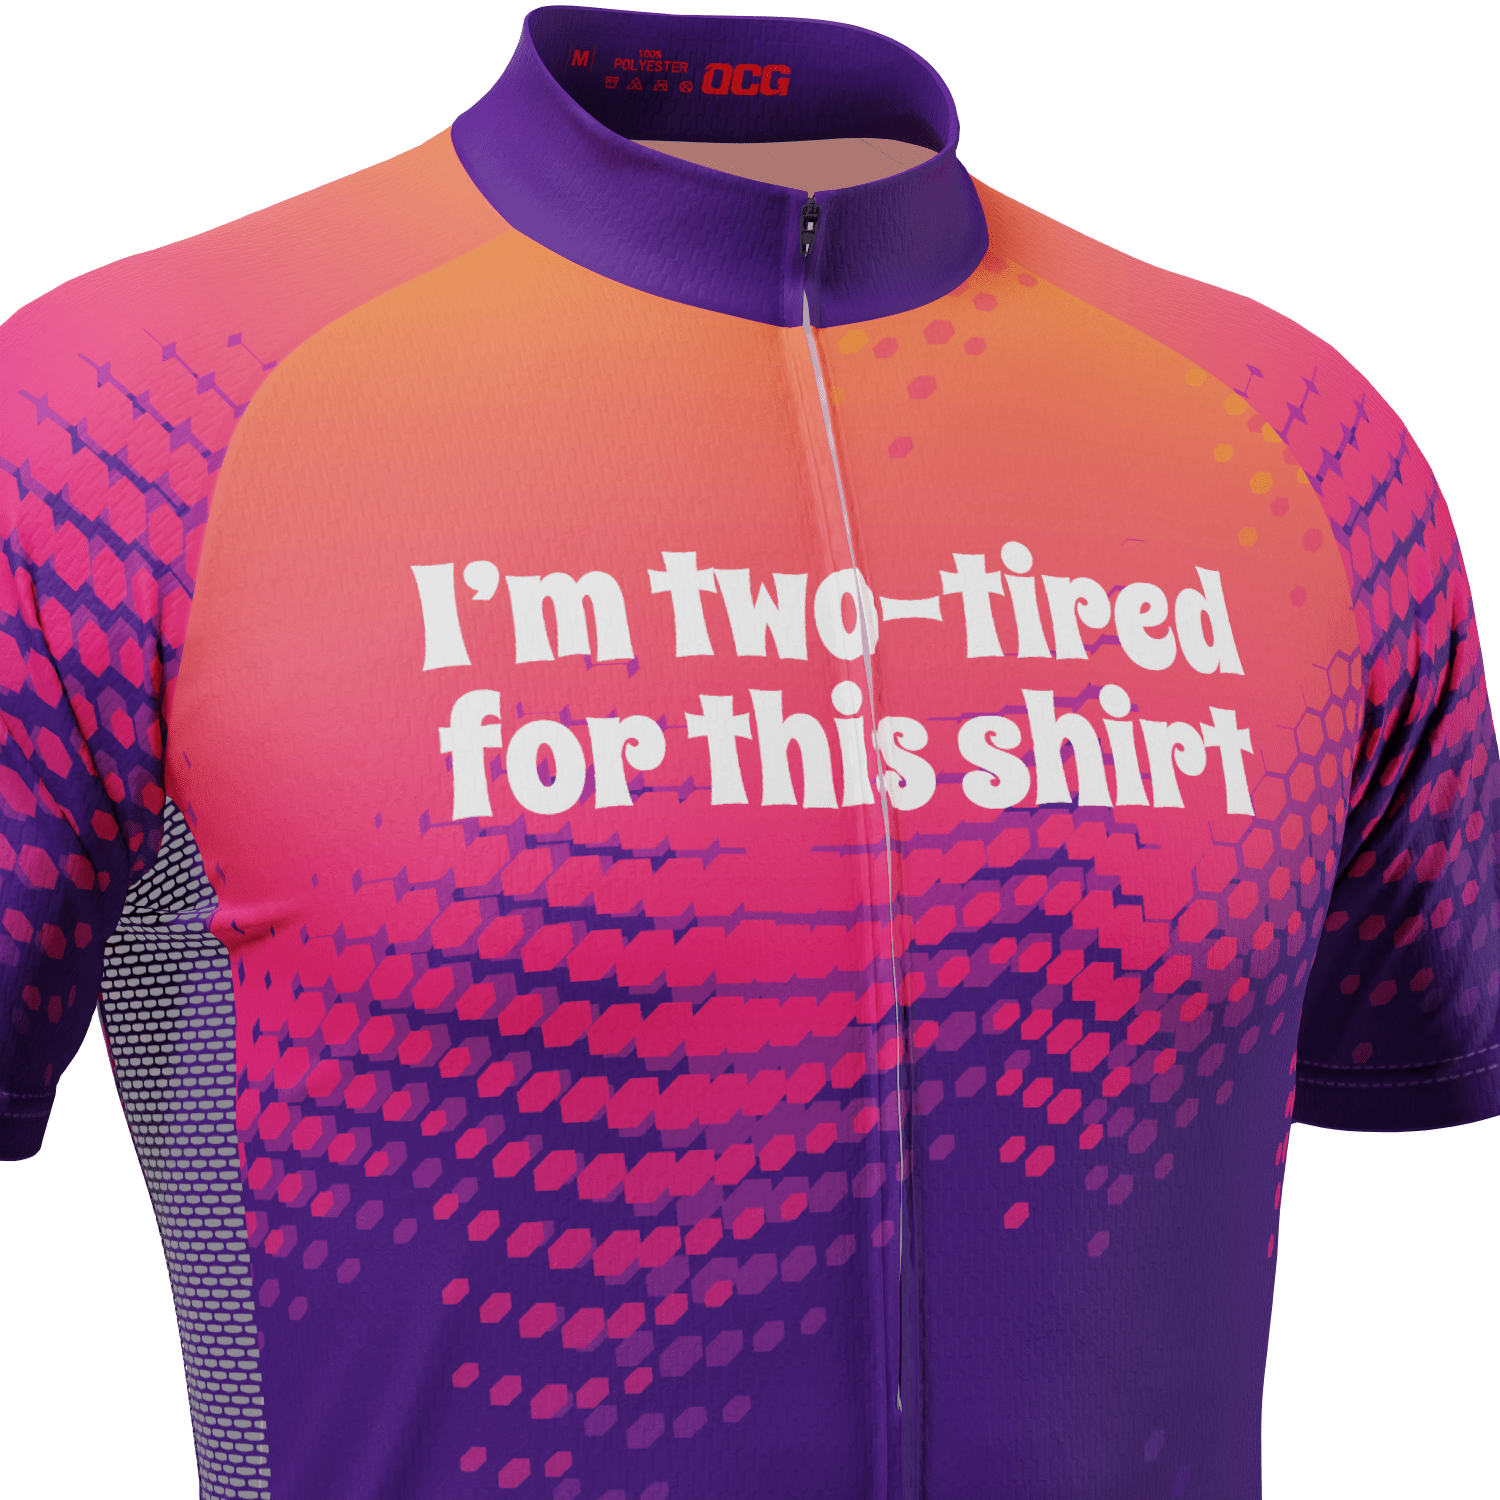 Men's I'm Two-tired For This Shirt! Short Sleeve Cycling Jersey